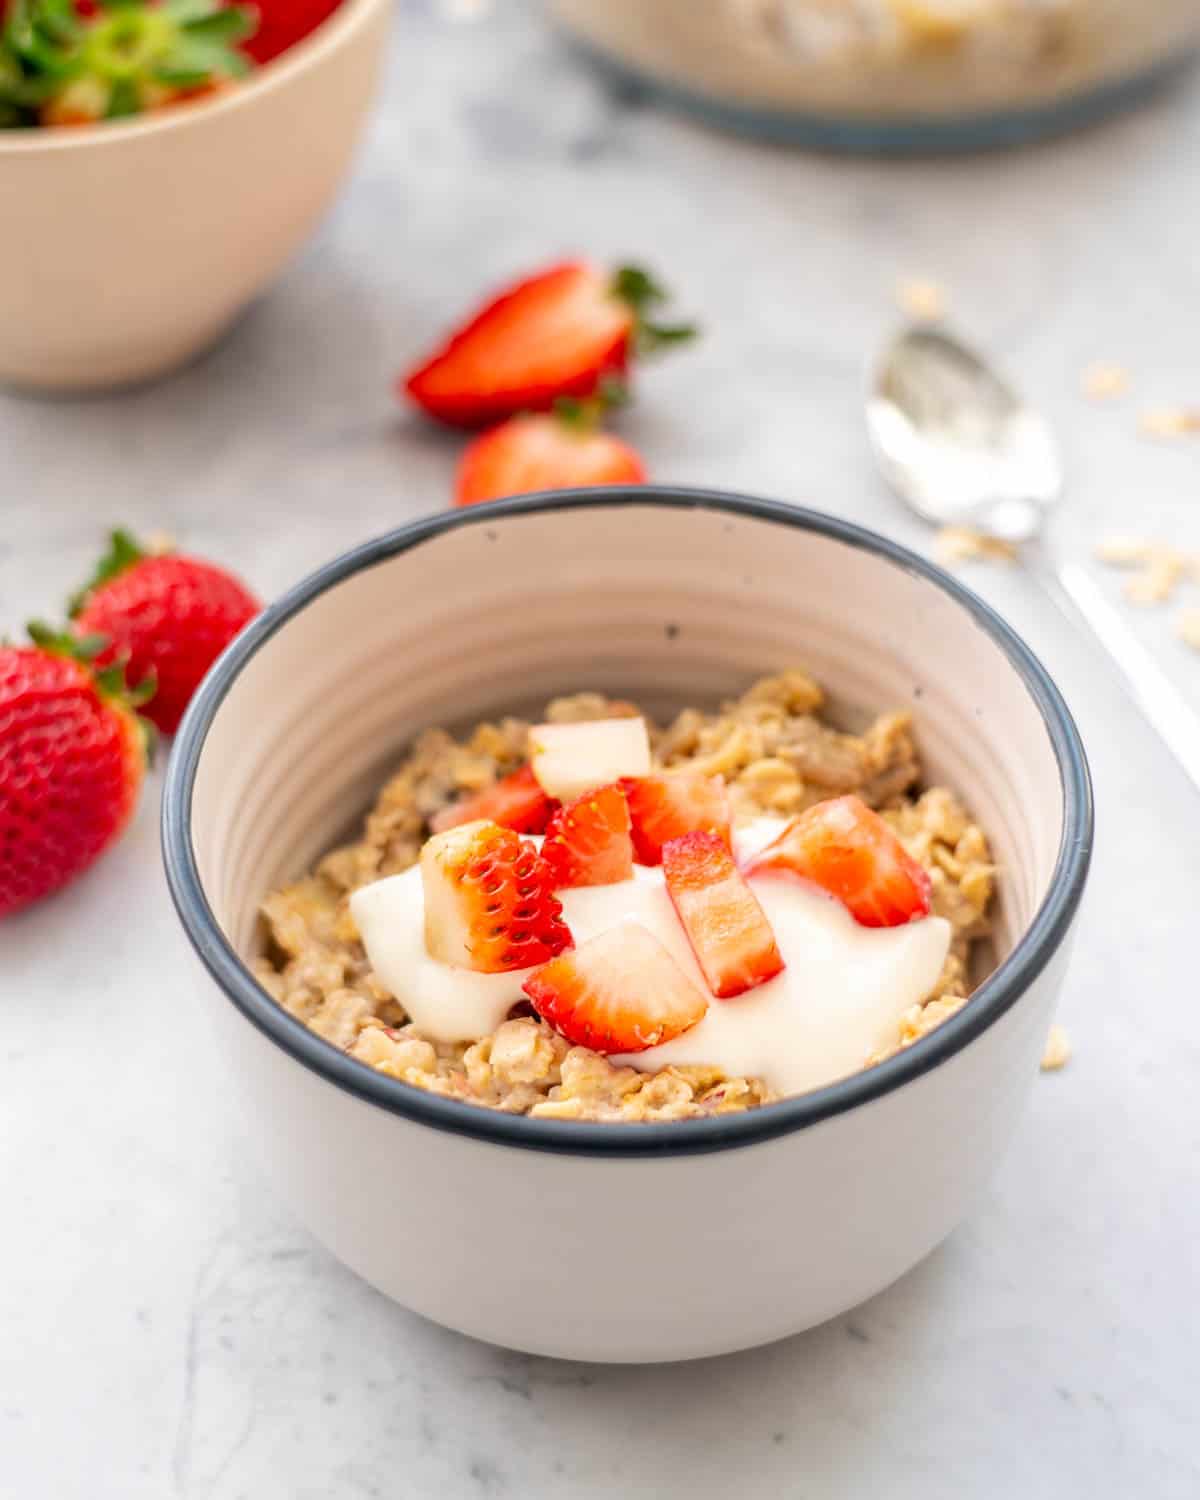 A serving of Bircher Muesli in a small ceramic dessert bowl with a tablespoon of greek yoghurt sitting on the bench amongst scattered strawberries and oats